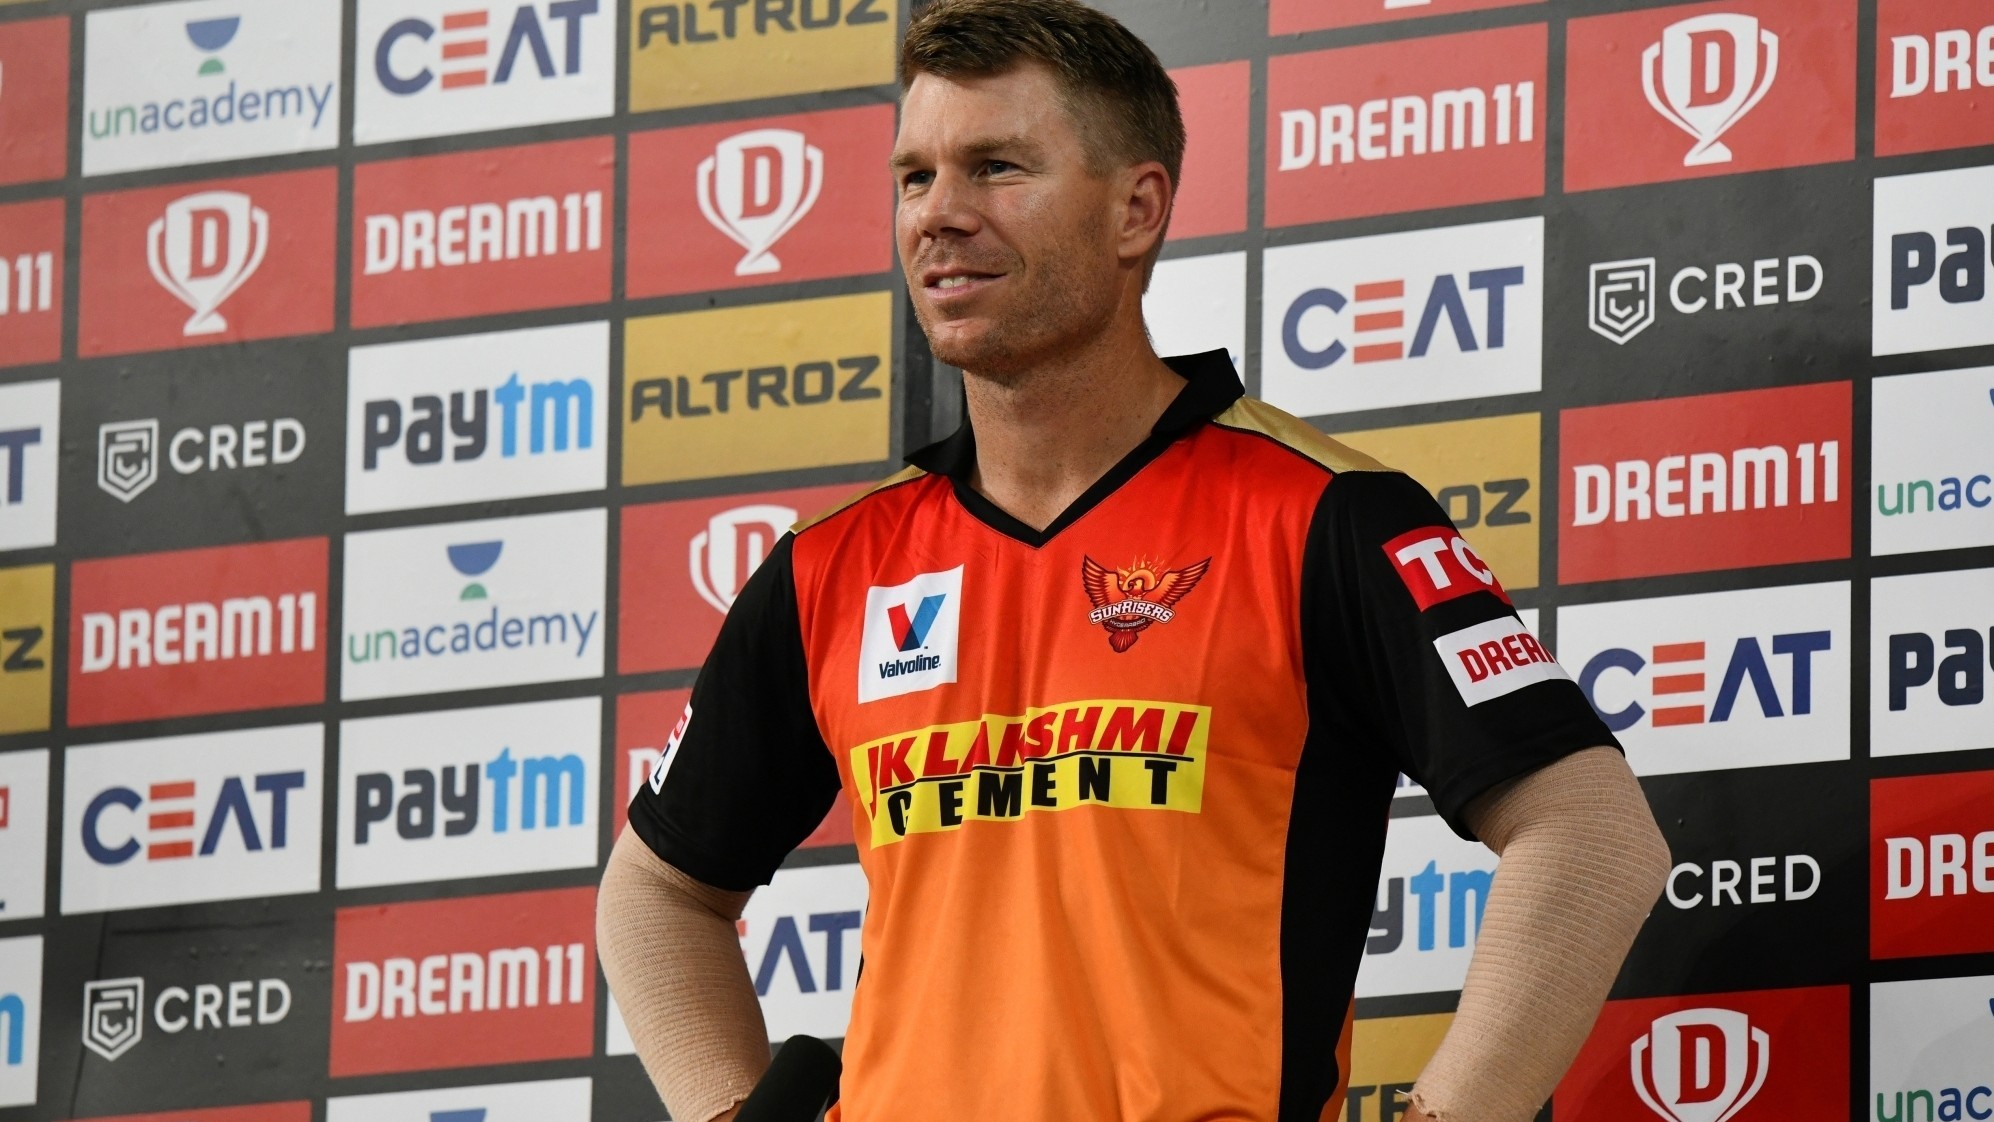 IPL 2020: ‘Have to forget this game and move forward’, David Warner after SRH’s loss to KXIP